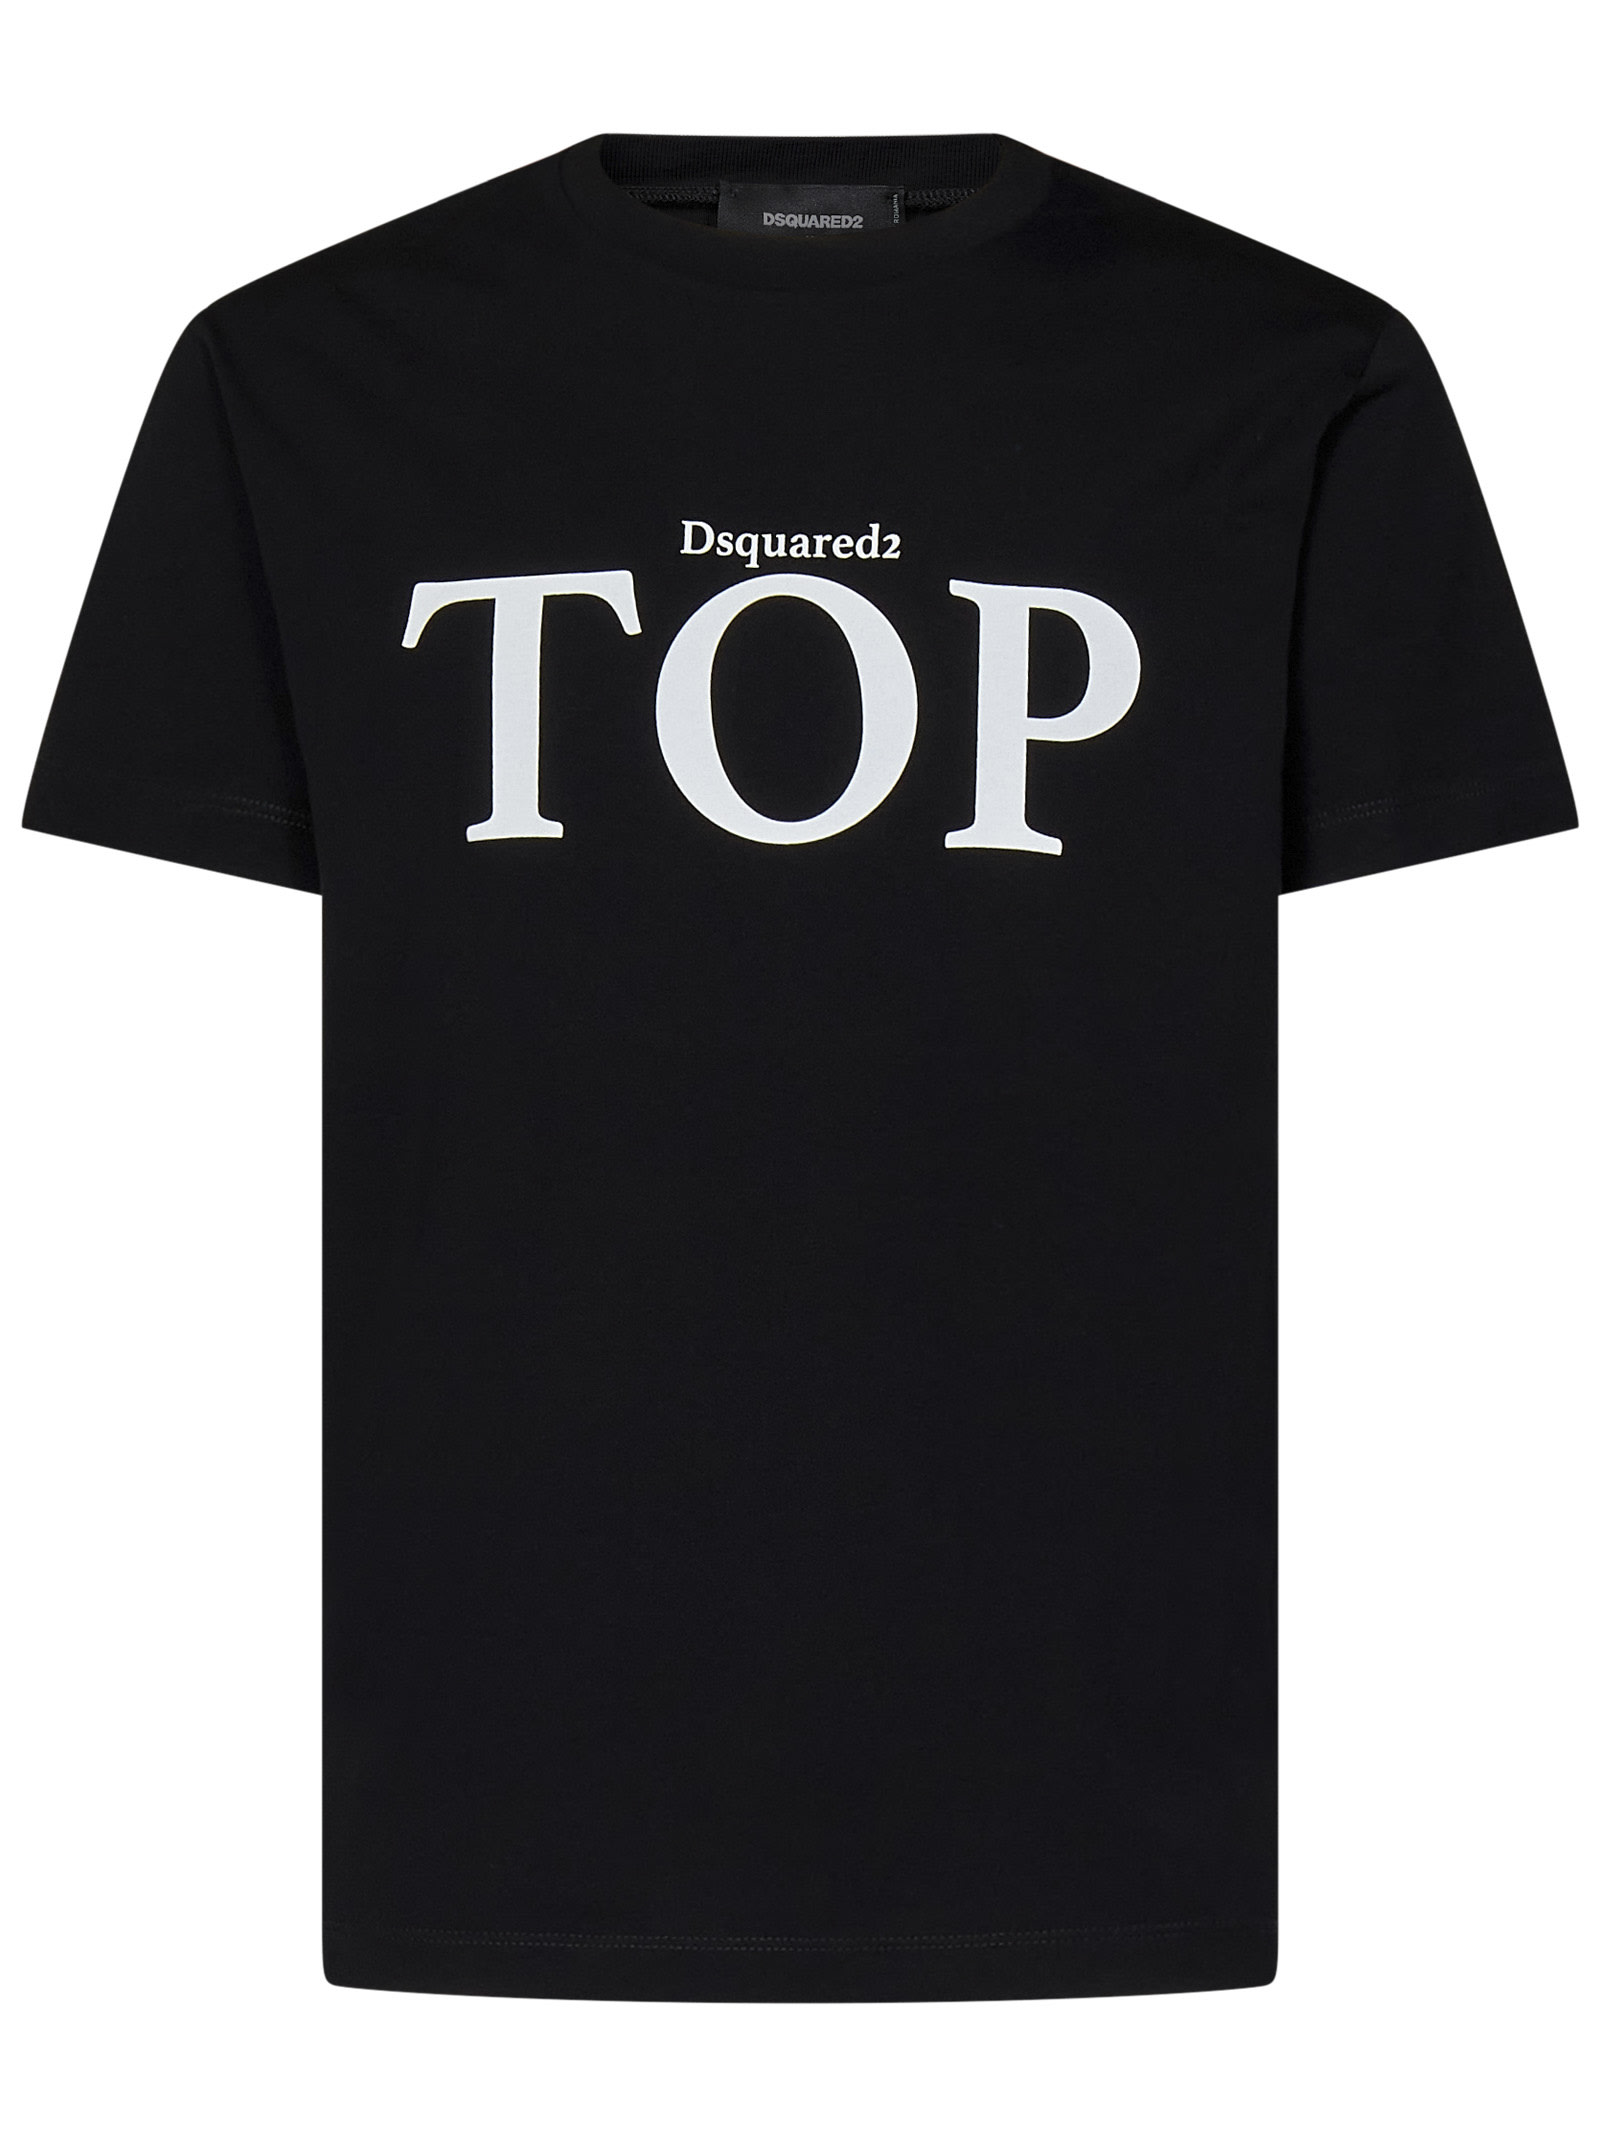 Top Cool Fit T-shirt